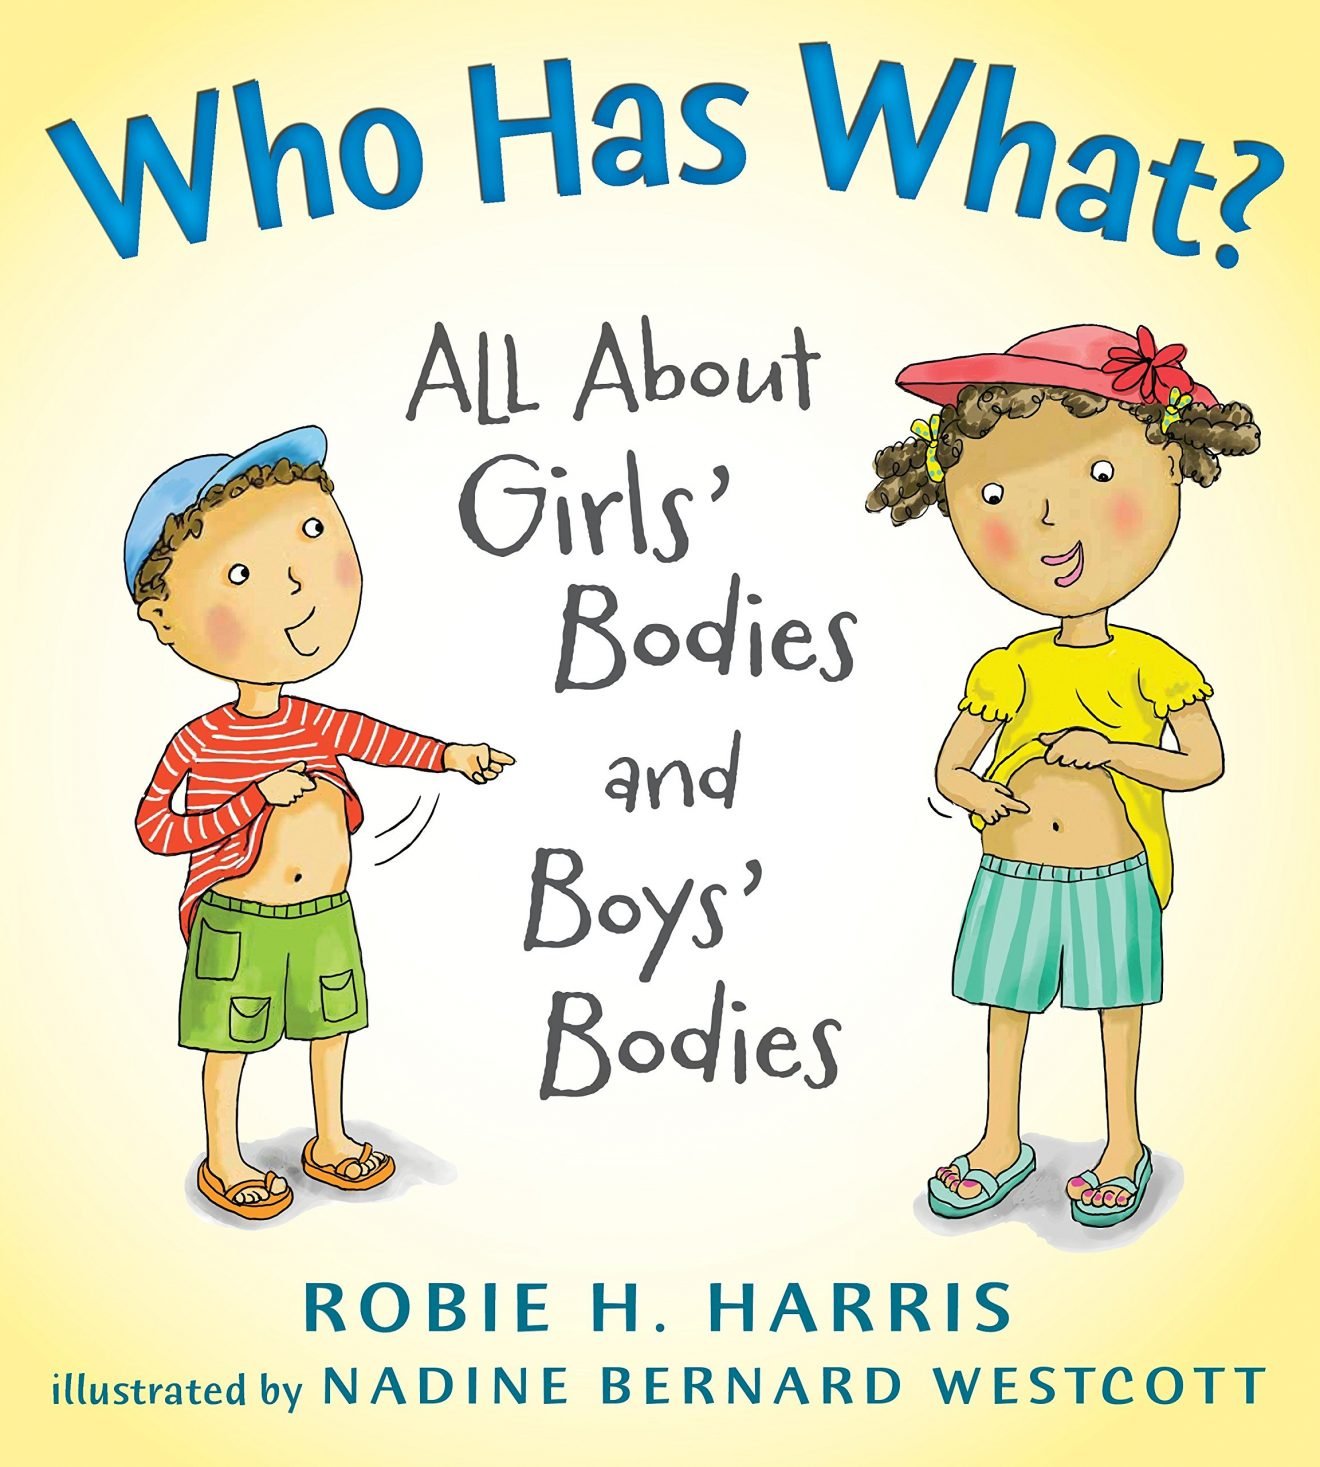 Who Has What: All About Girls' Bodies and Boys' Bodies